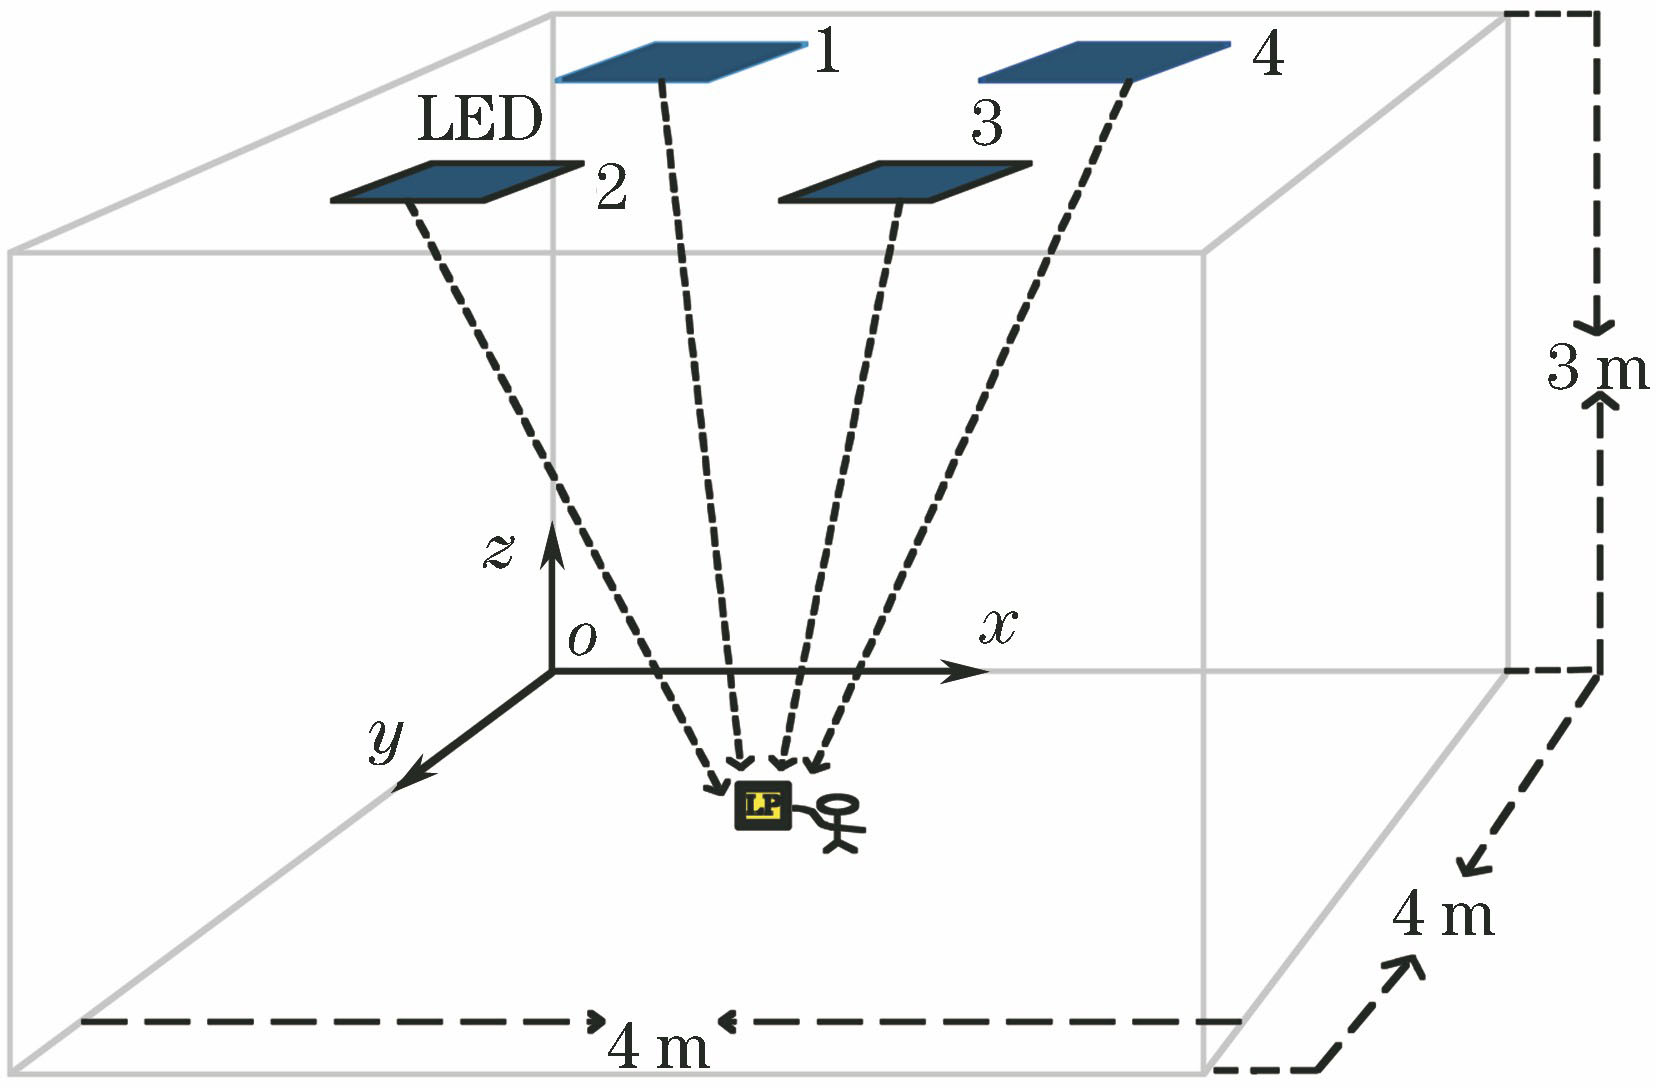 Model of visible light indoor positioning system